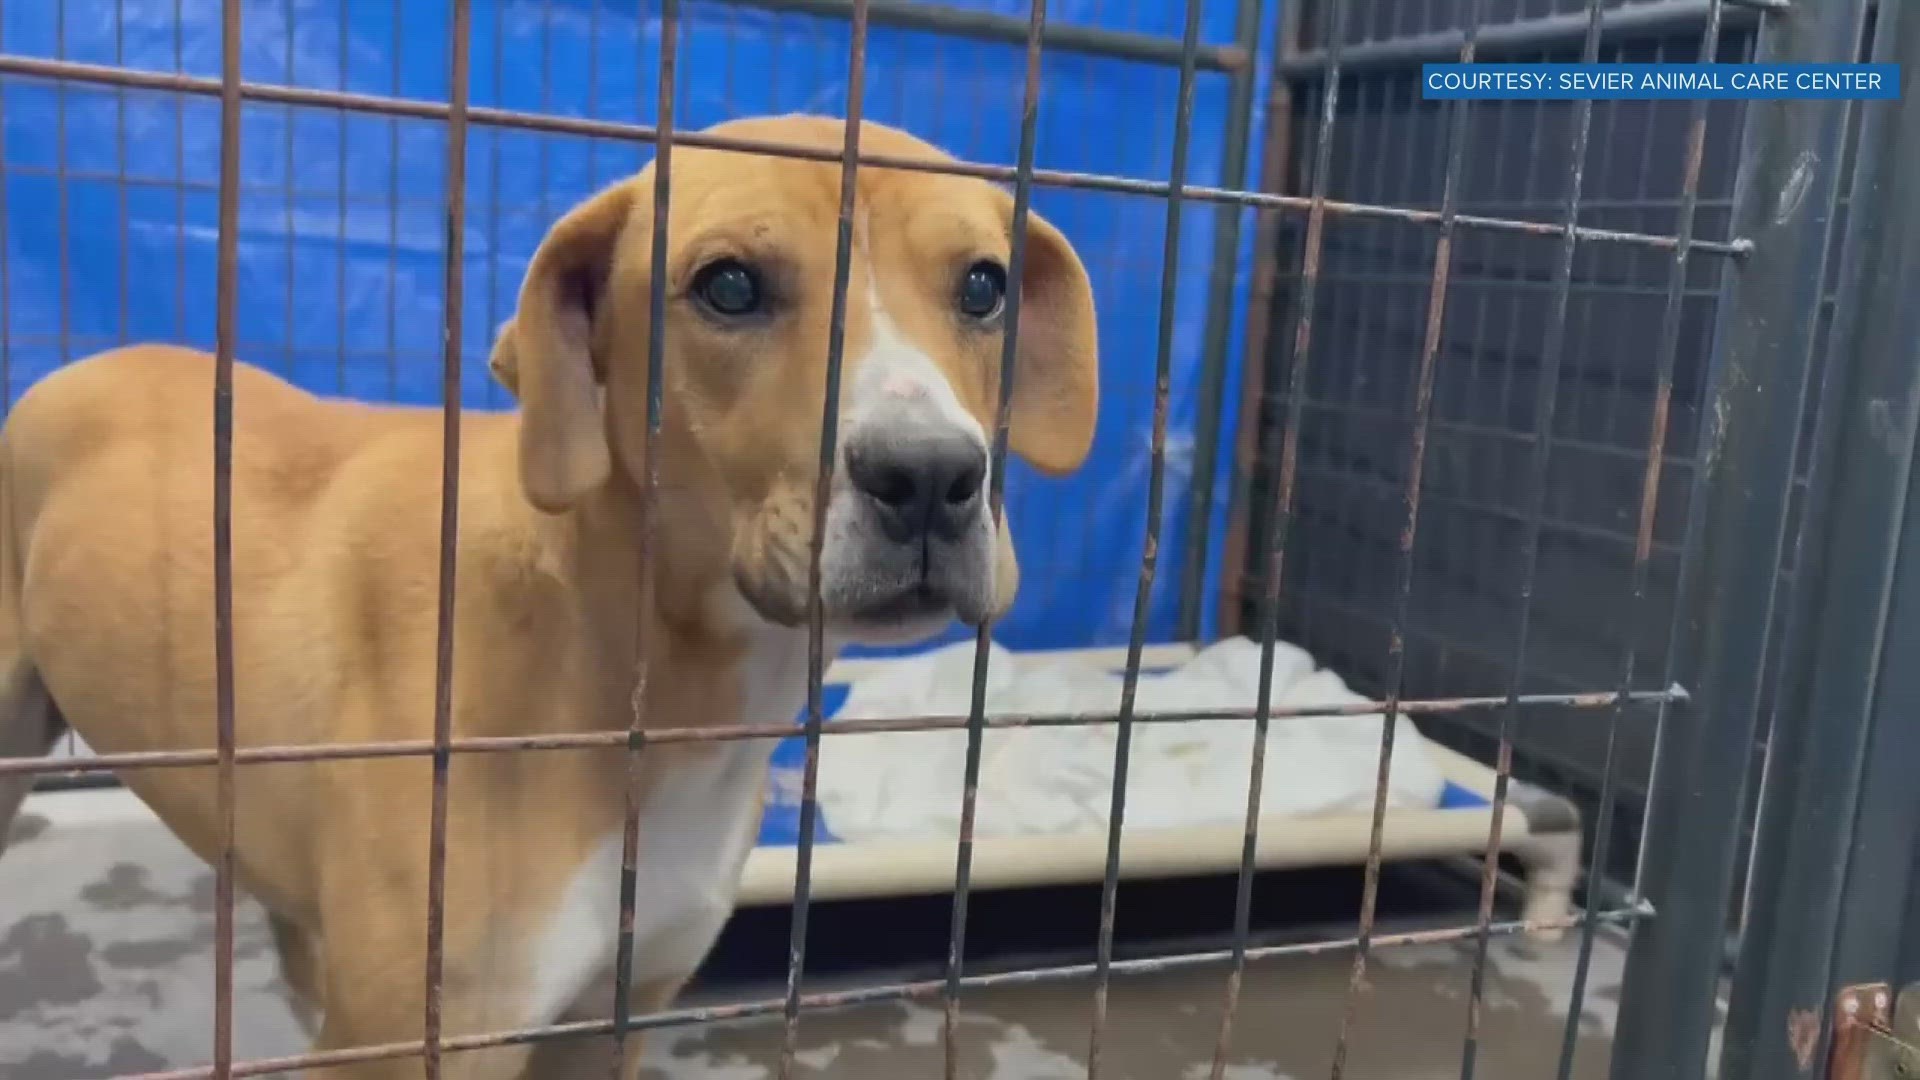 The Sevier Animal Care Center said Monday started with all of its kennels full before it took in a few emergency animal control cases totaling 16 more dogs.